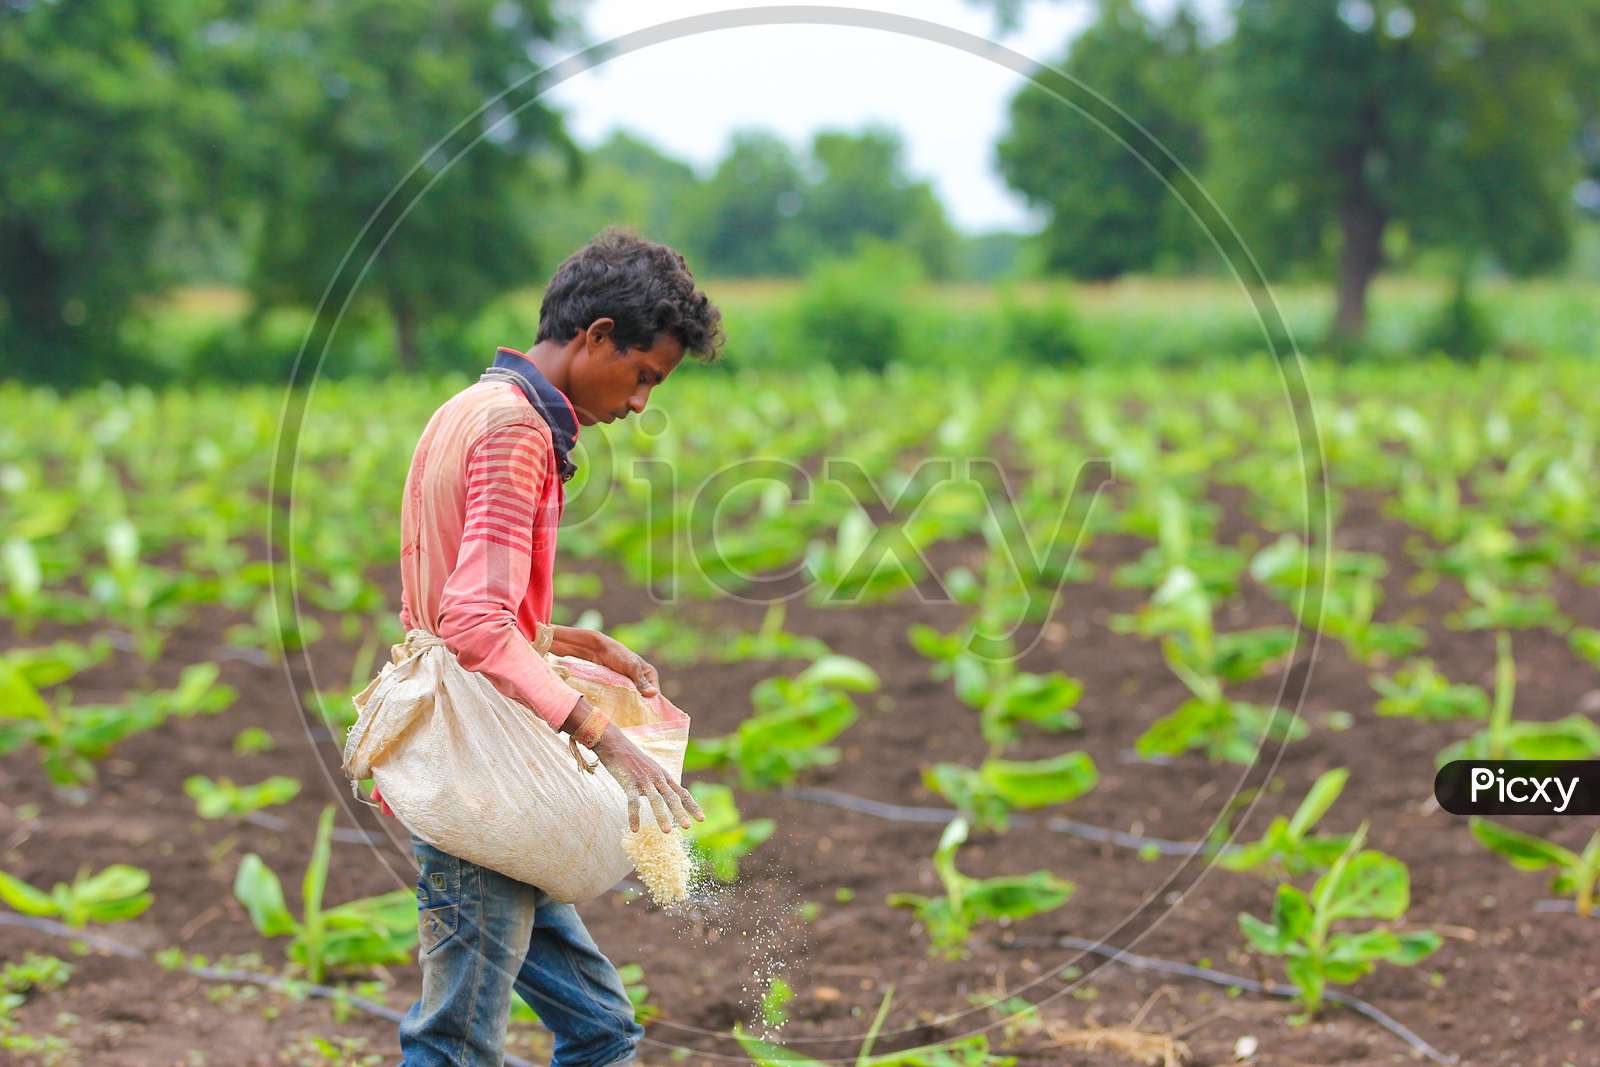 A Farmer Giving Granulated Fertilizers to a Young Banana Plant